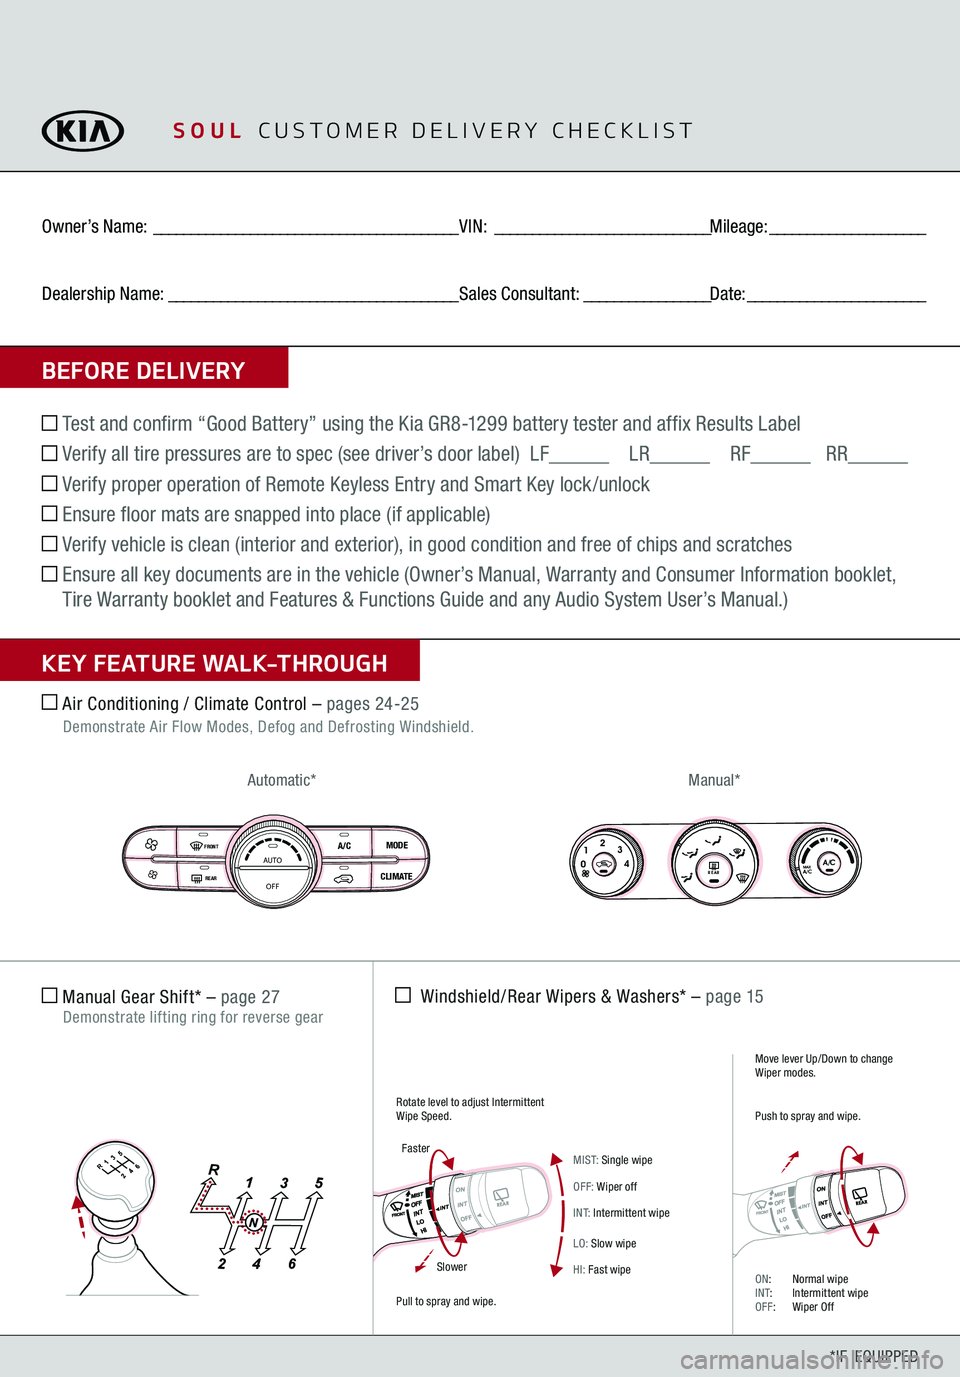 KIA SOUL 2015  Features and Functions Guide  Air Conditioning / Climate Control – 
pages 24-25
  
 Demonstrate Air Flow Modes, Defog and Defrosting Windshield. 
  Windshield/Rear Wipers & Washers* – 
page 15
Automatic*
Manual*
 Manual Gear 